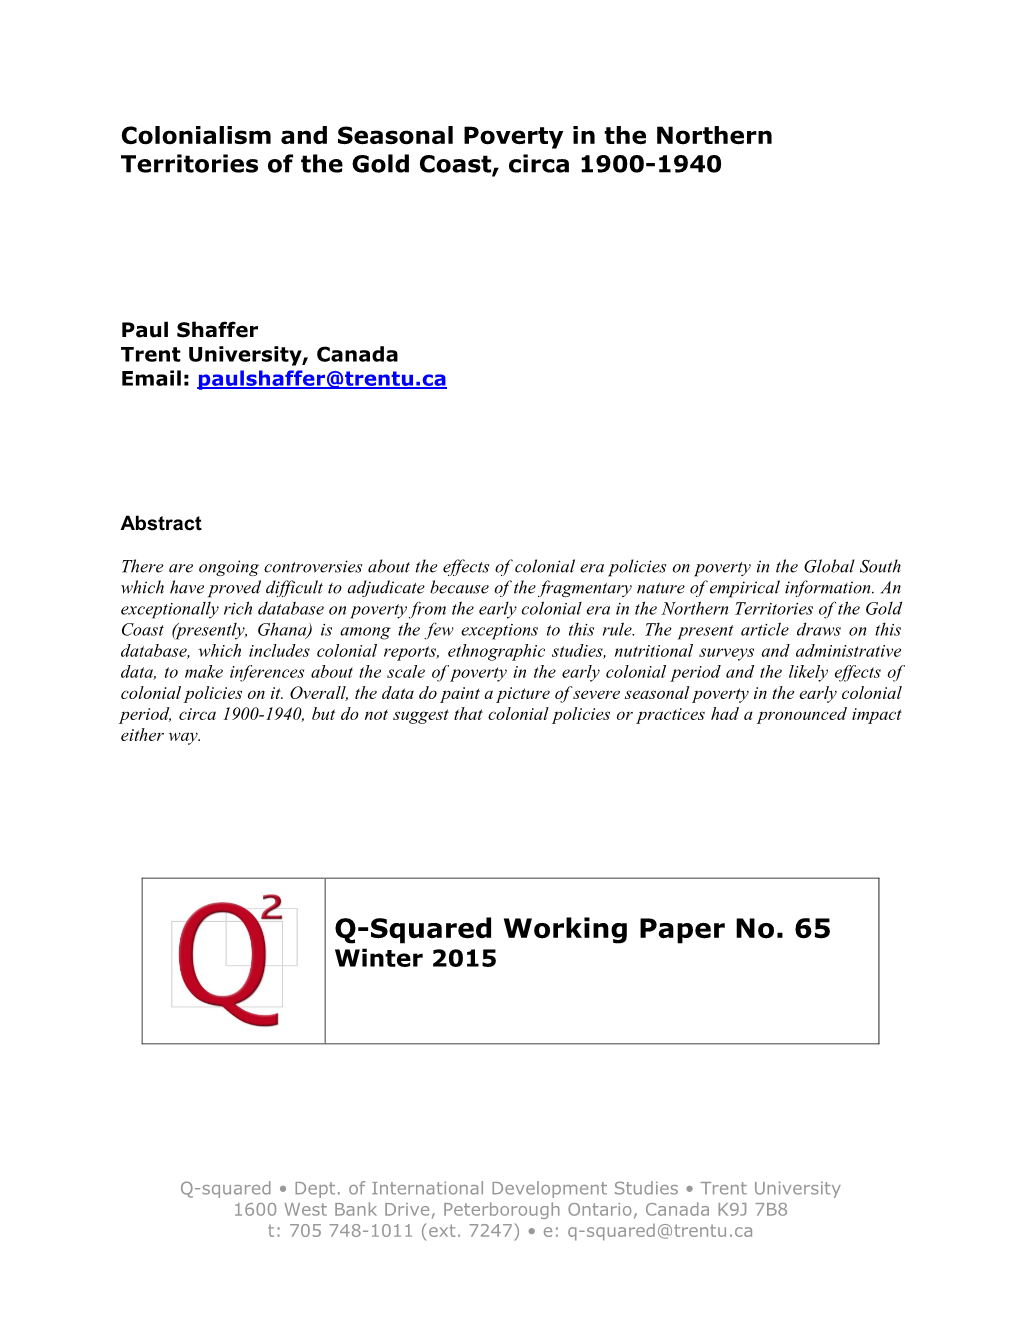 Colonialism and Seasonal Poverty in the Northern Territories of the Gold Coast, Circa 1900-1940